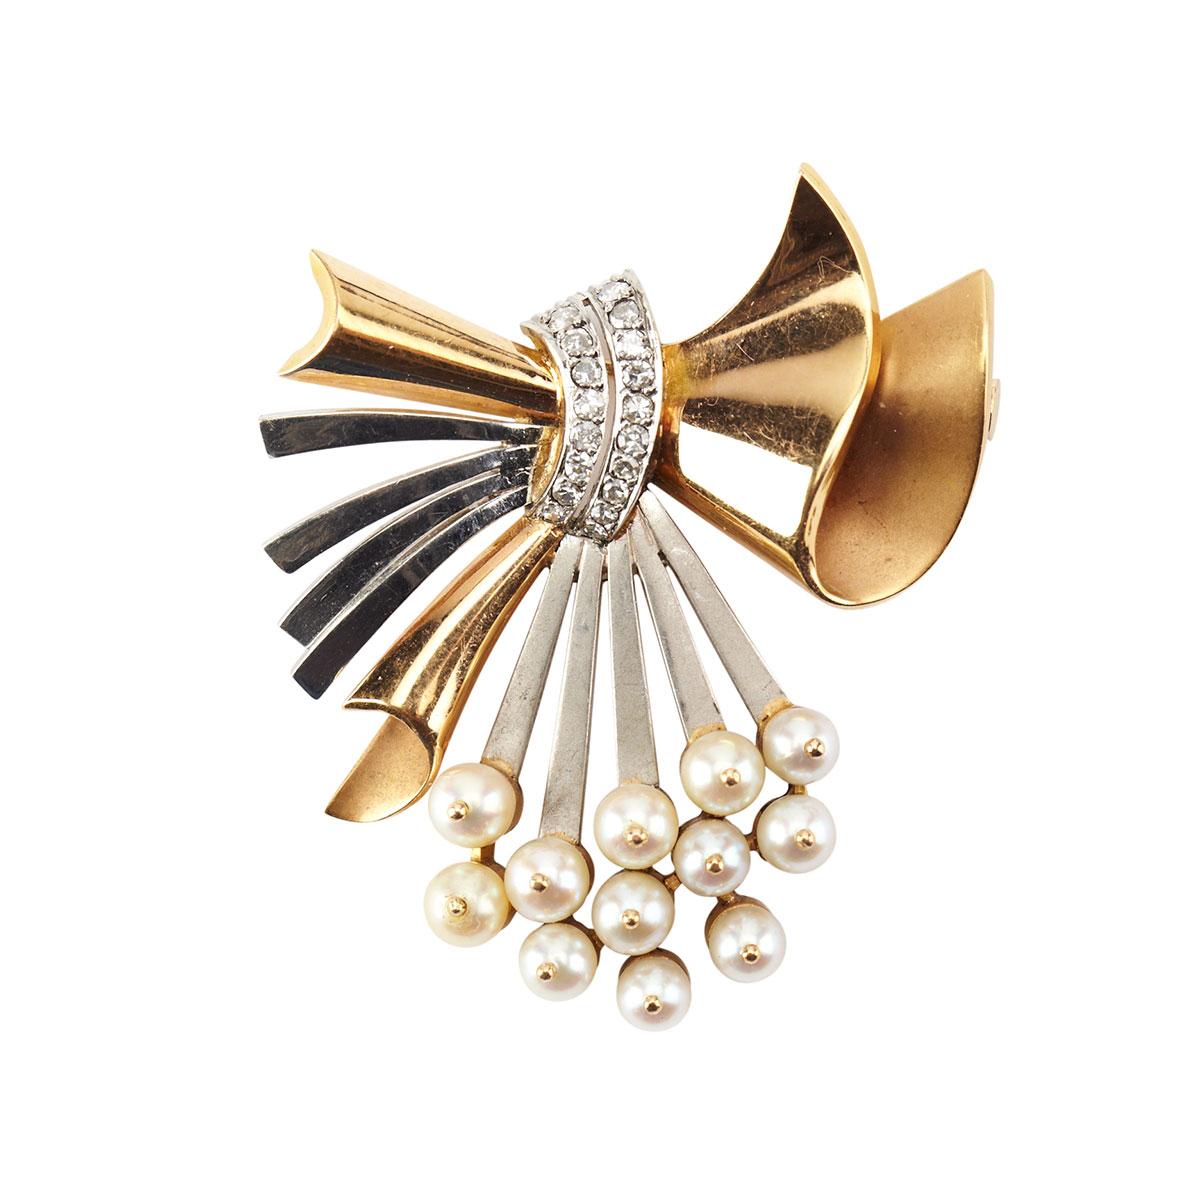 18k Yellow Gold And Platinum Gold Spray Brooch